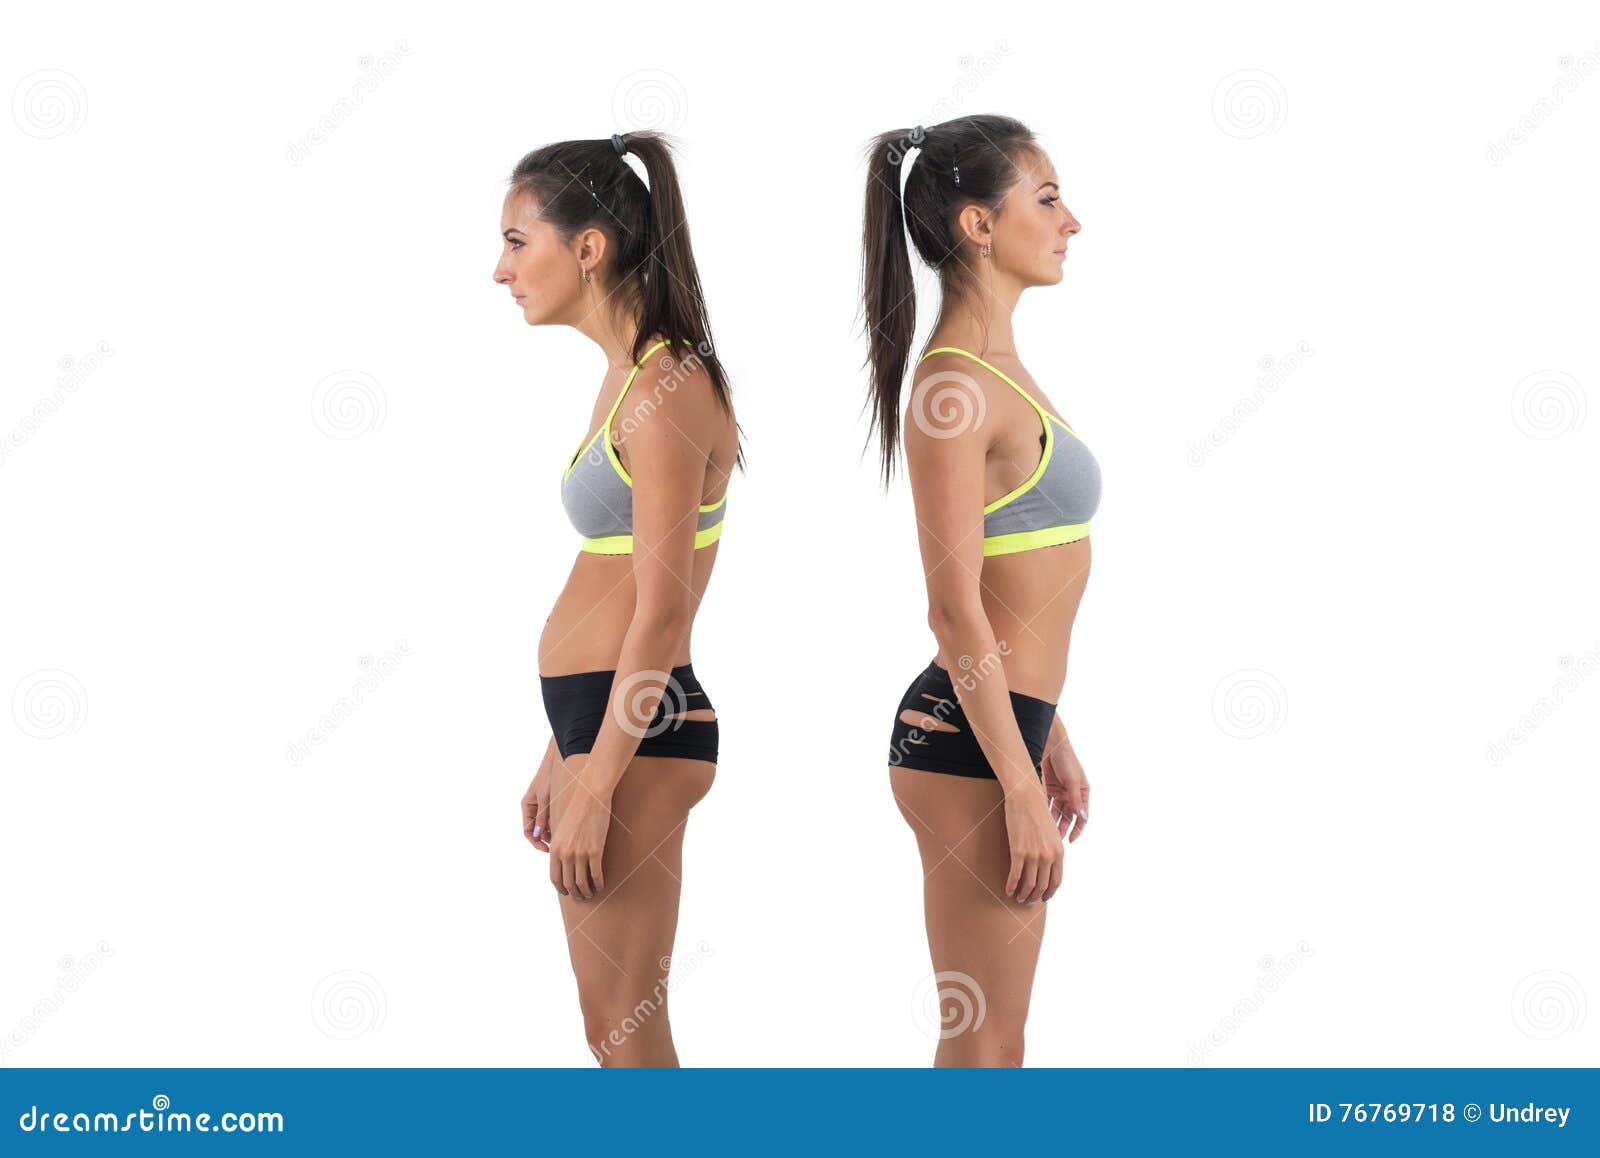 woman with impaired posture position defect scoliosis and ideal bearing